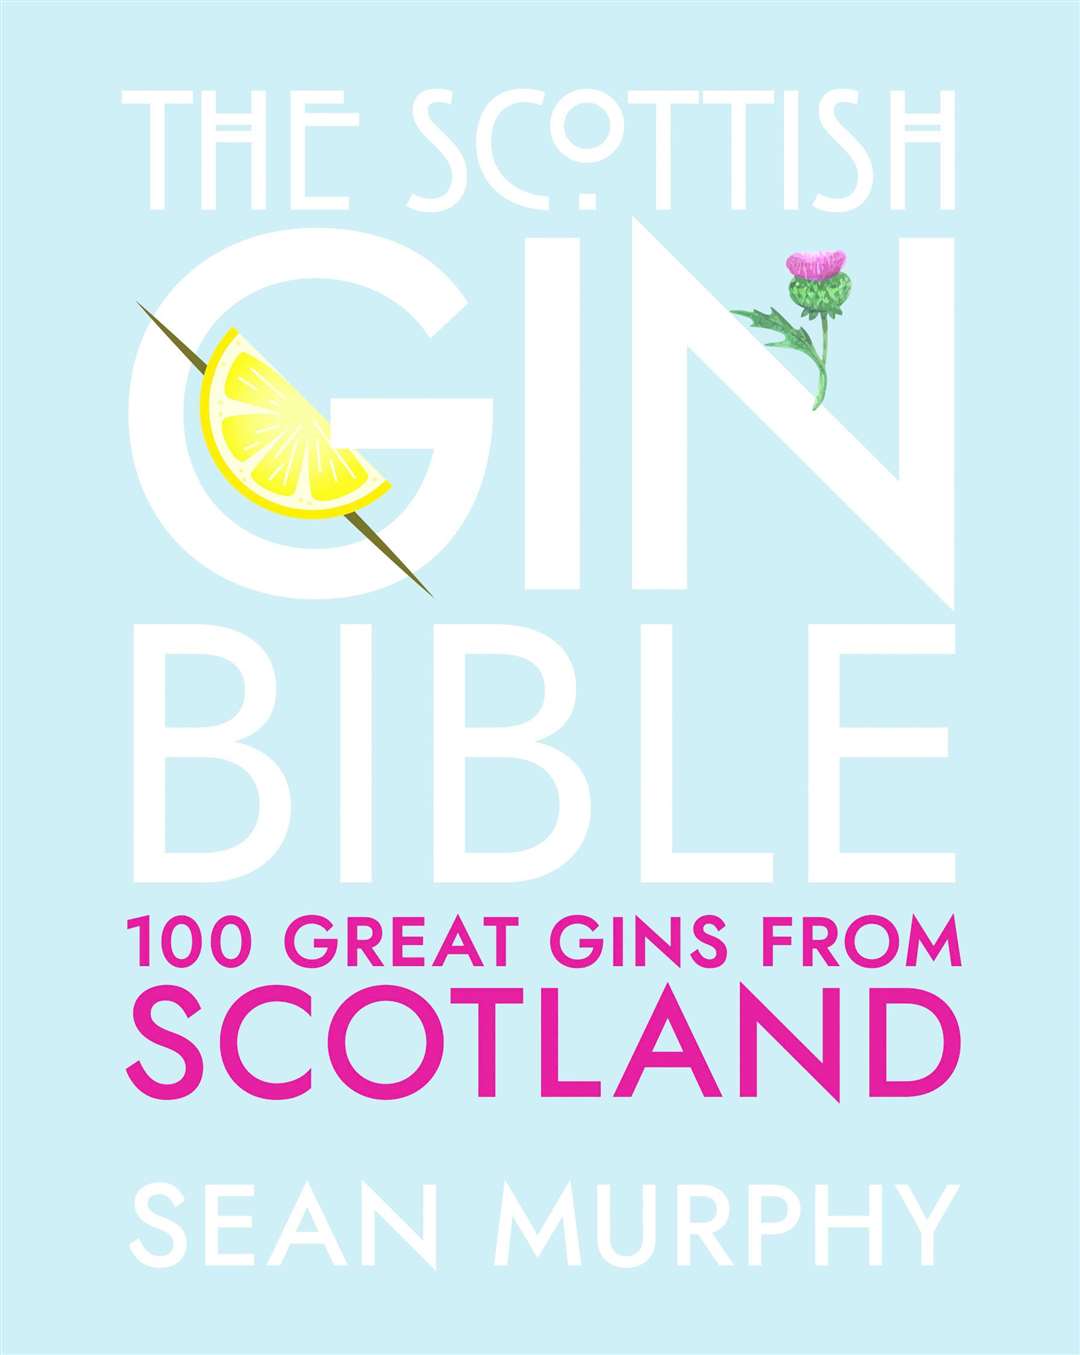 The Scottish Gin Bible cover.